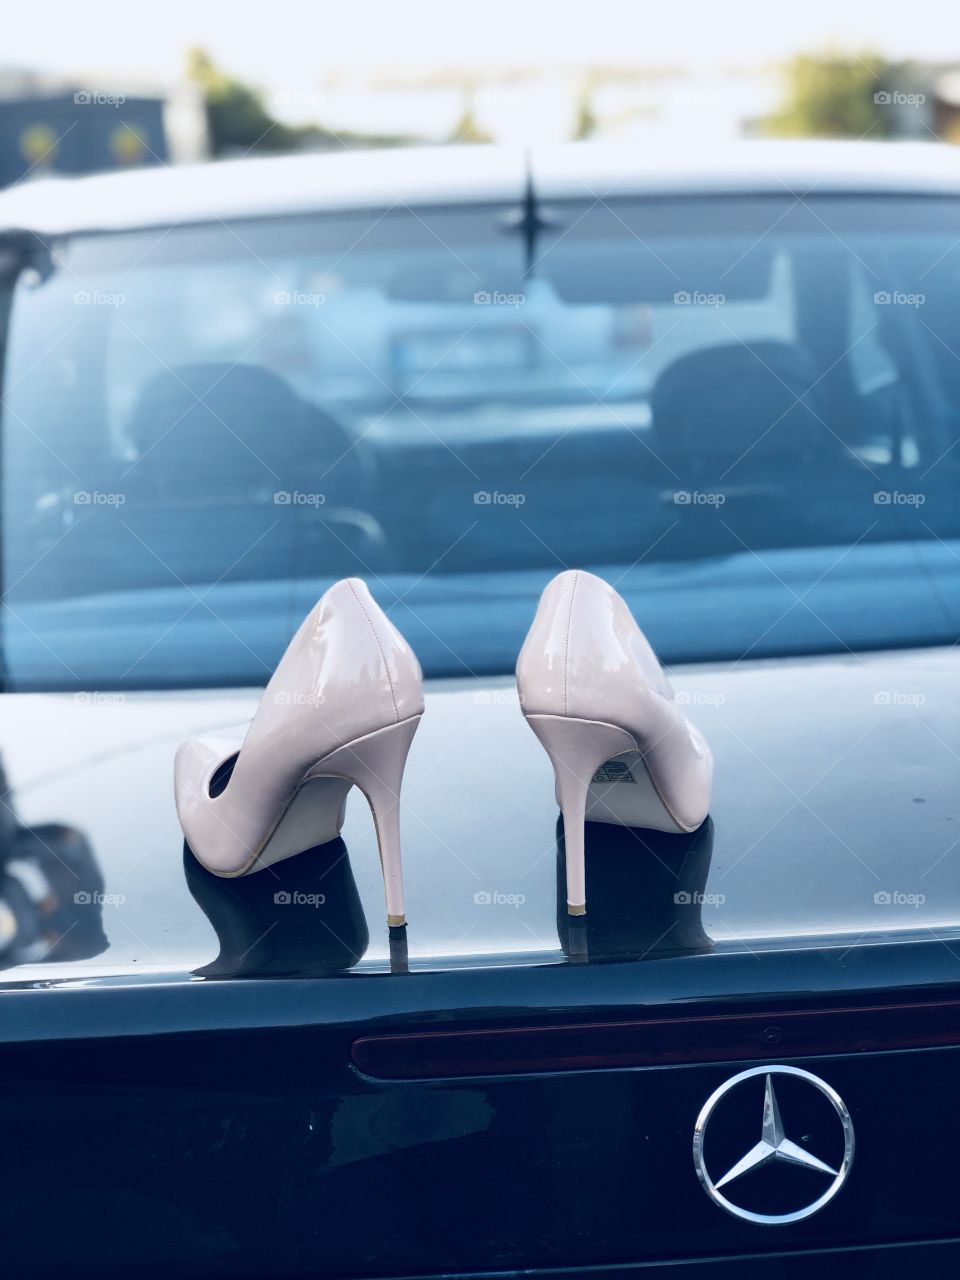 Who drives this world? Girls! Just give her one beautiful pair of heels. And vehicle with the girl’s name